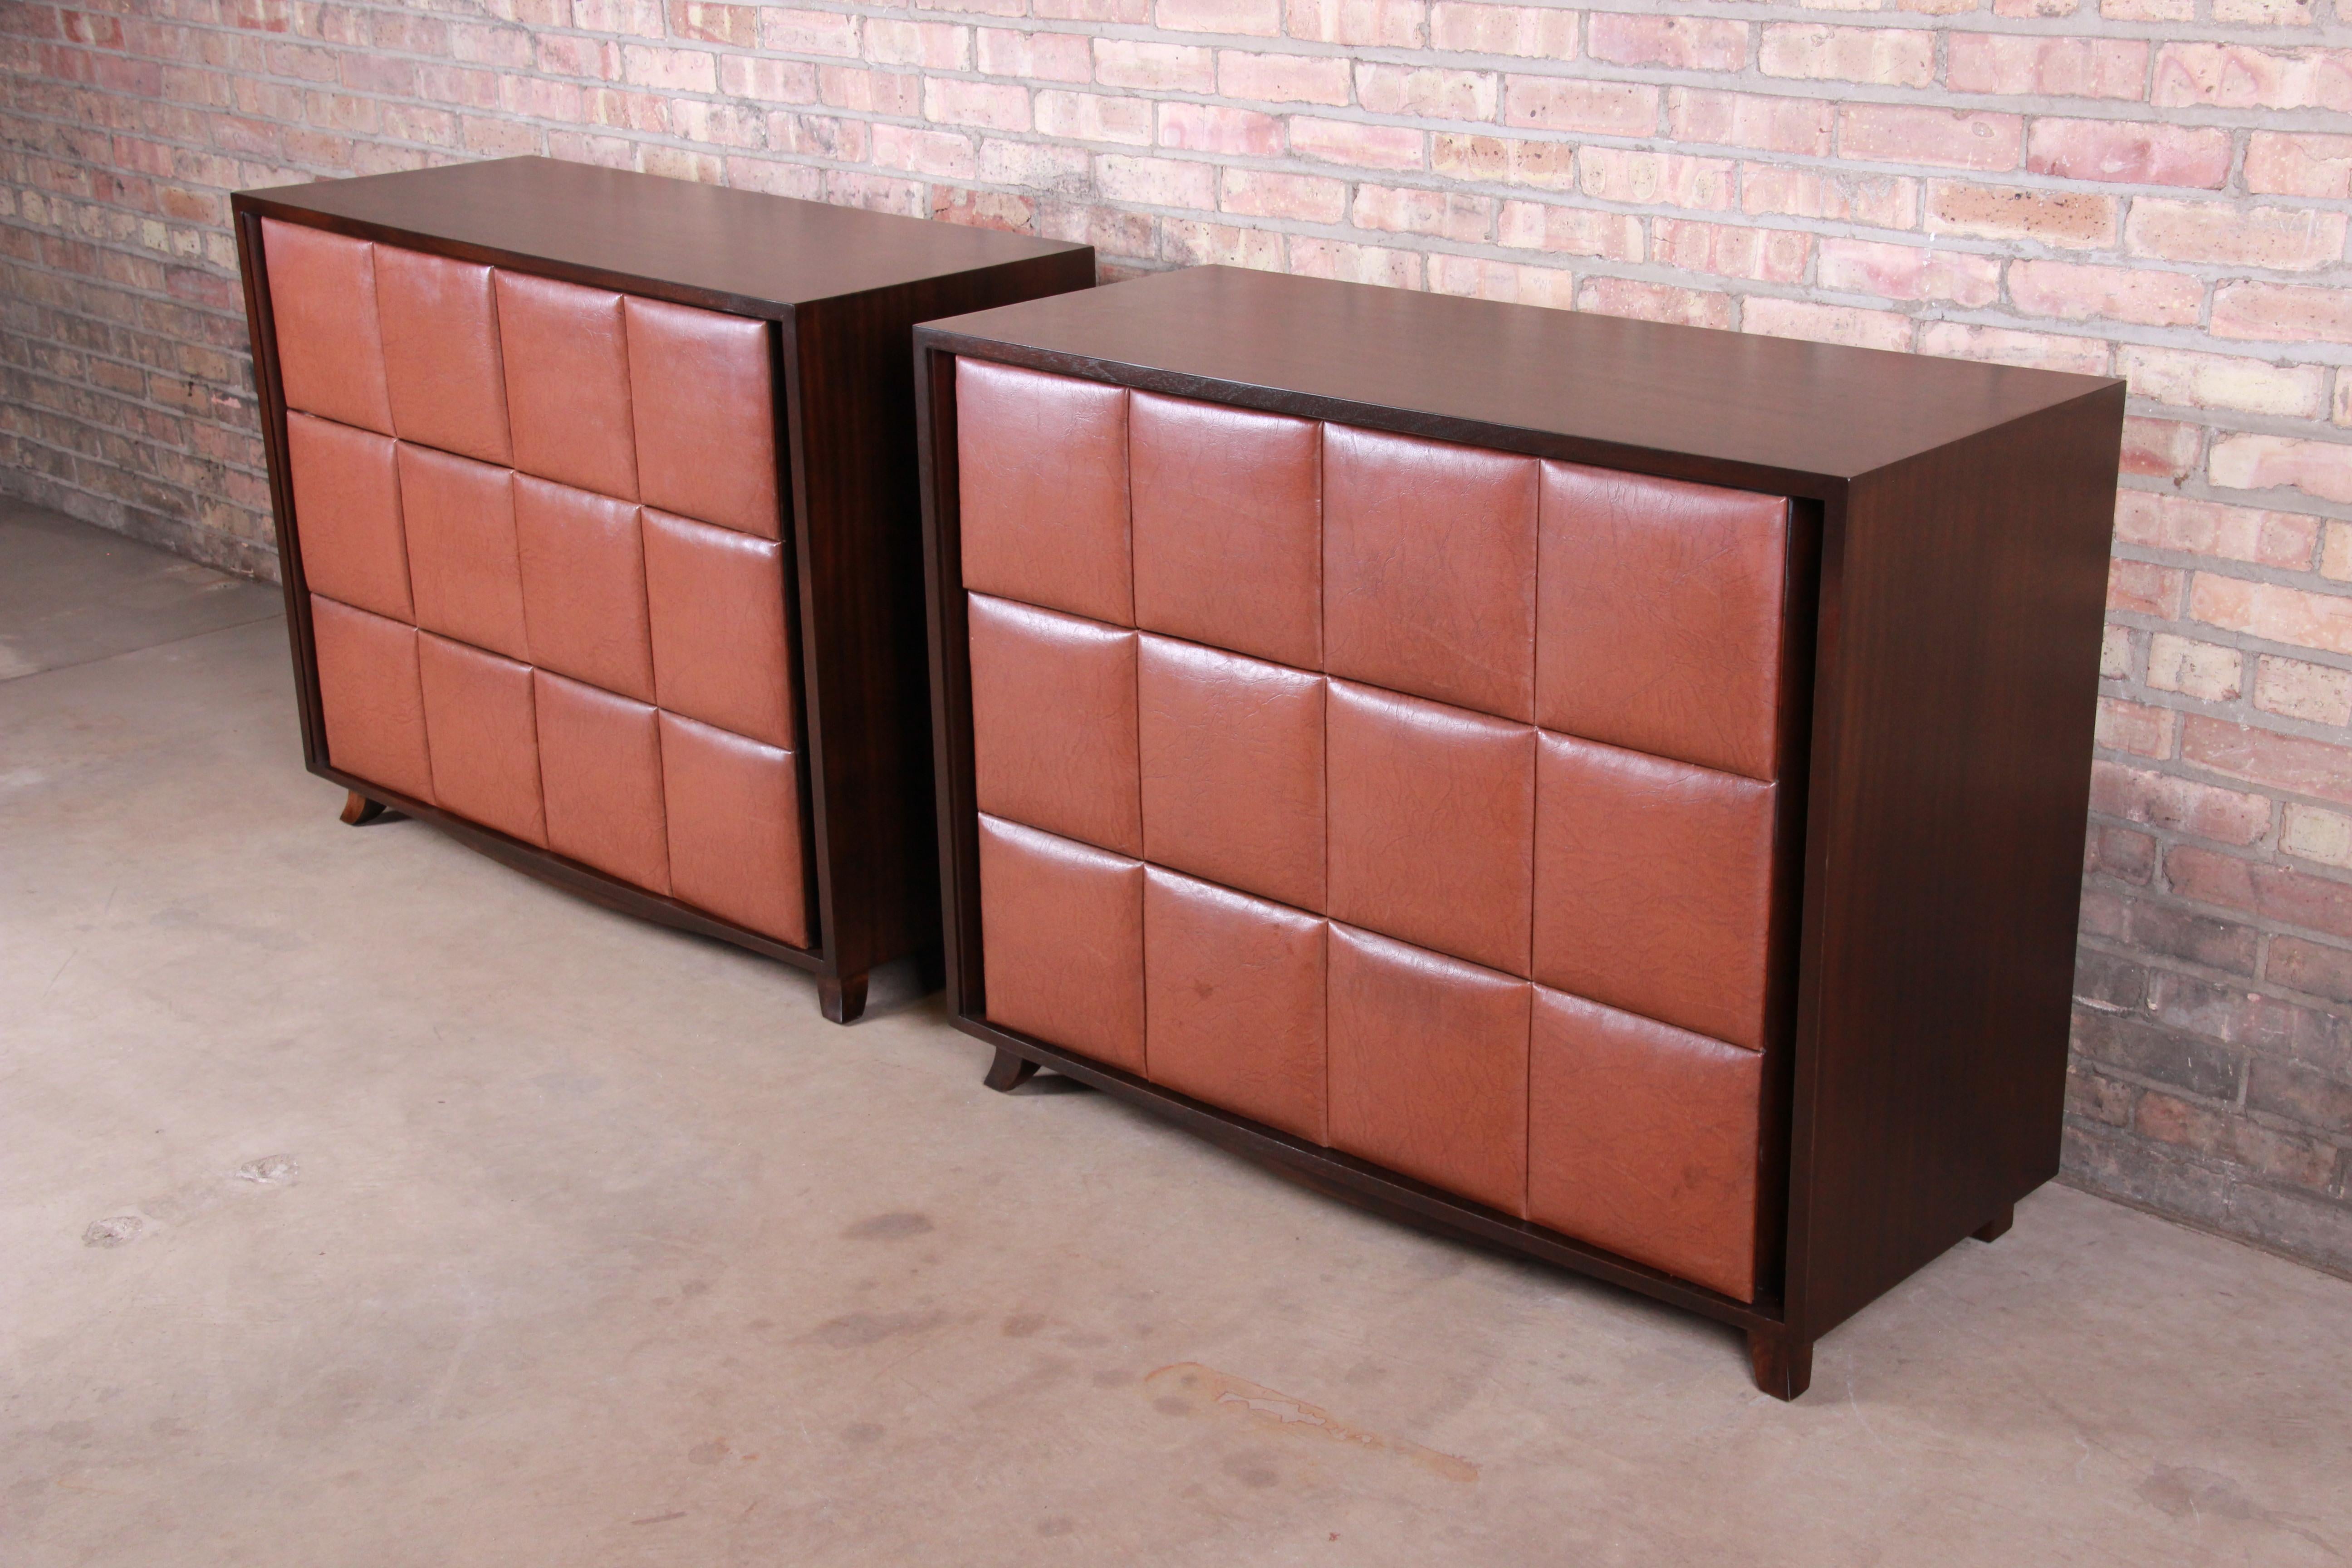 An exceptional pair of Art Deco or Mid-Century Modern three-drawer bachelor chests or large nightstands

By Gilbert Rohde for Herman Miller

USA, circa 1930s

Mahogany cases, with Naugahyde drawer fronts.

Measures: 44.25